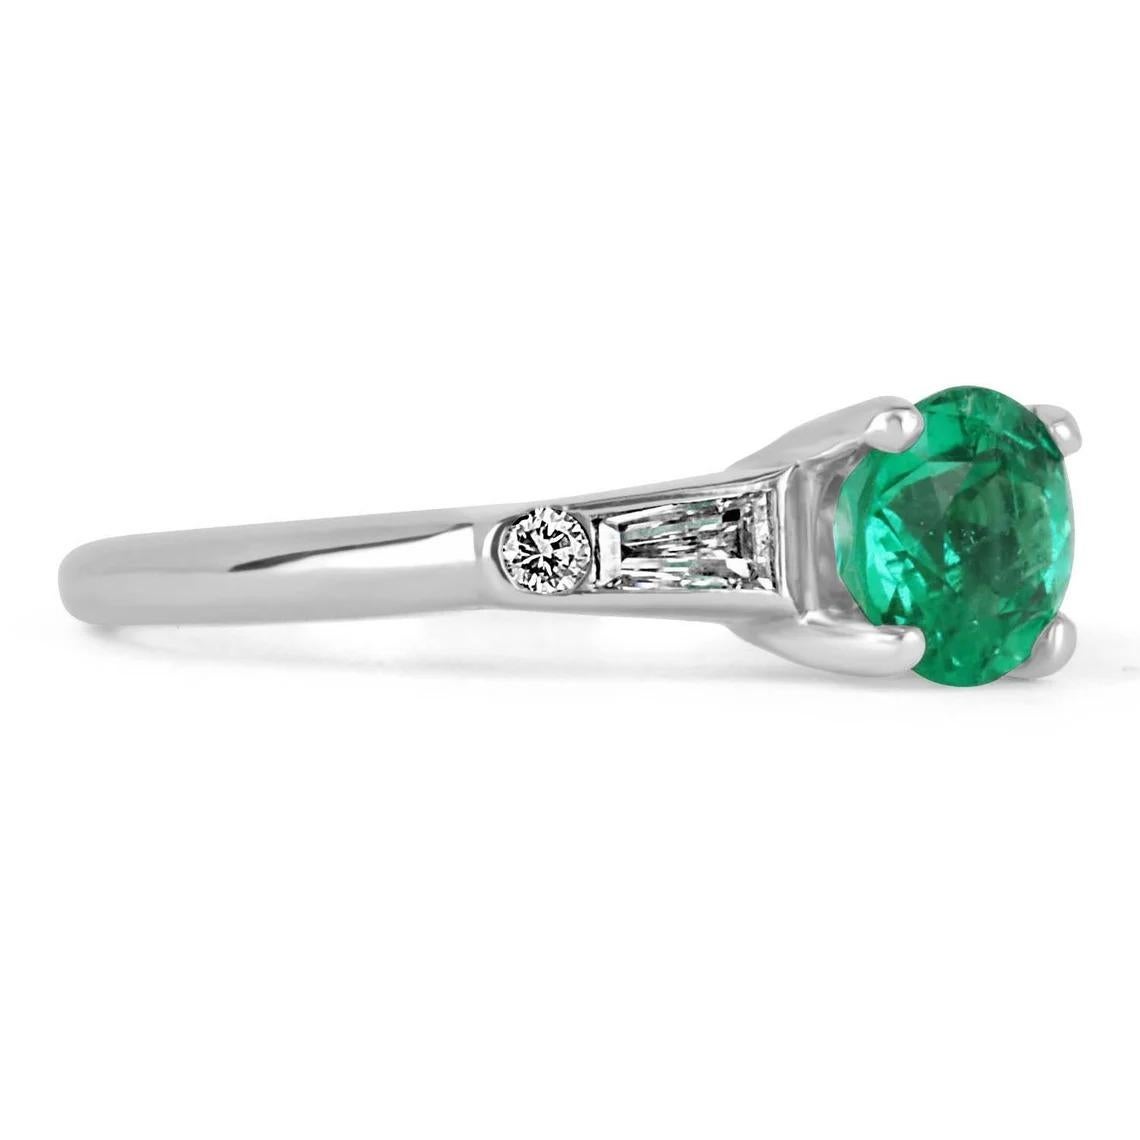 Setting Style: Five-Stone
Setting Material: Platinum
Weight: 4.6 Grams

Main Stone: Emerald
Shape: Round Cut
Approx Weight: 1.0-Carat
Clarity: Transparent
Color: Vivid Green
Luster: Excellent-Very Good
Origin: Colombia
Treatments: Natural,